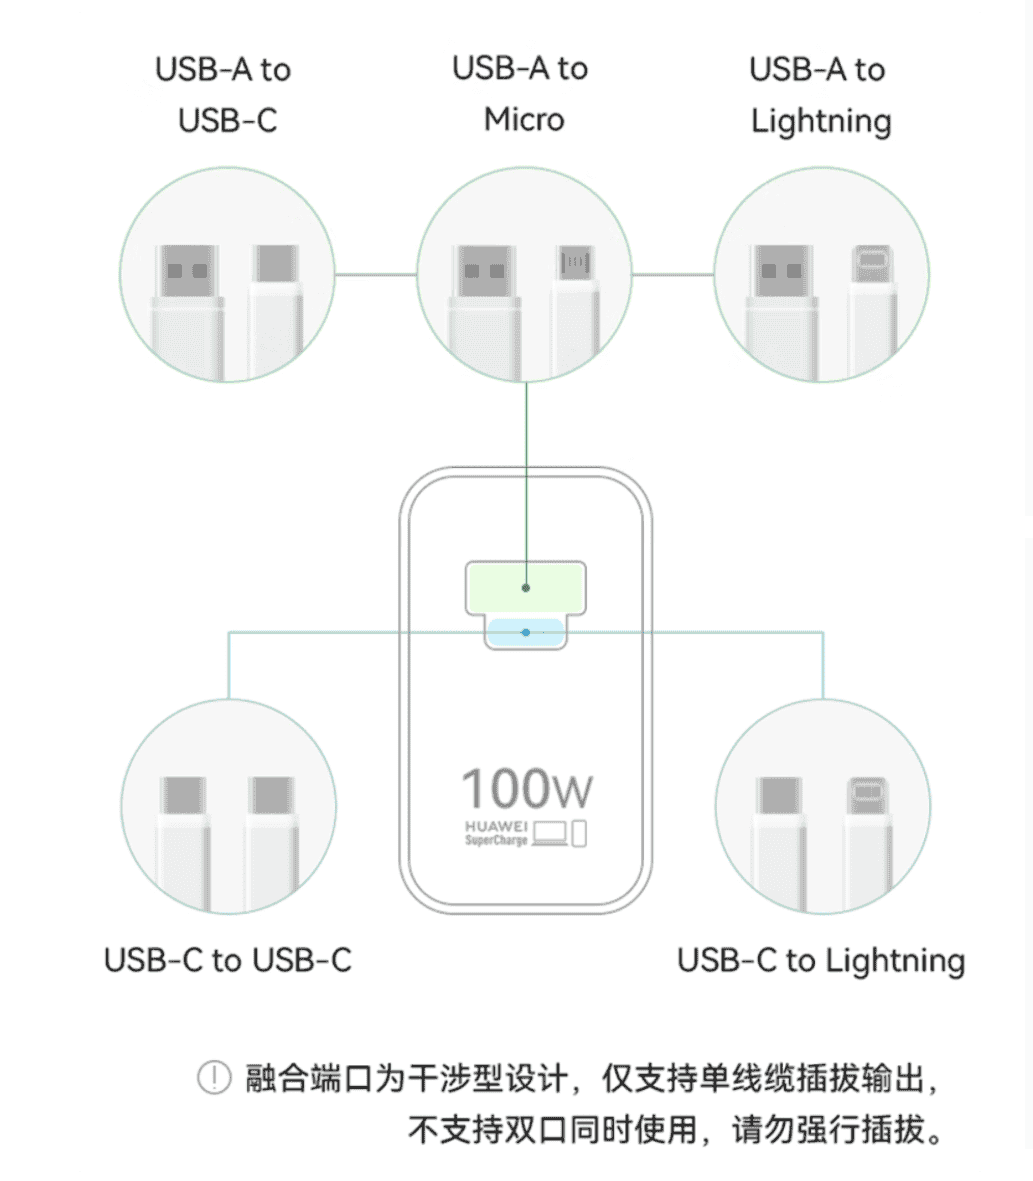 Huawei Max 100W charger